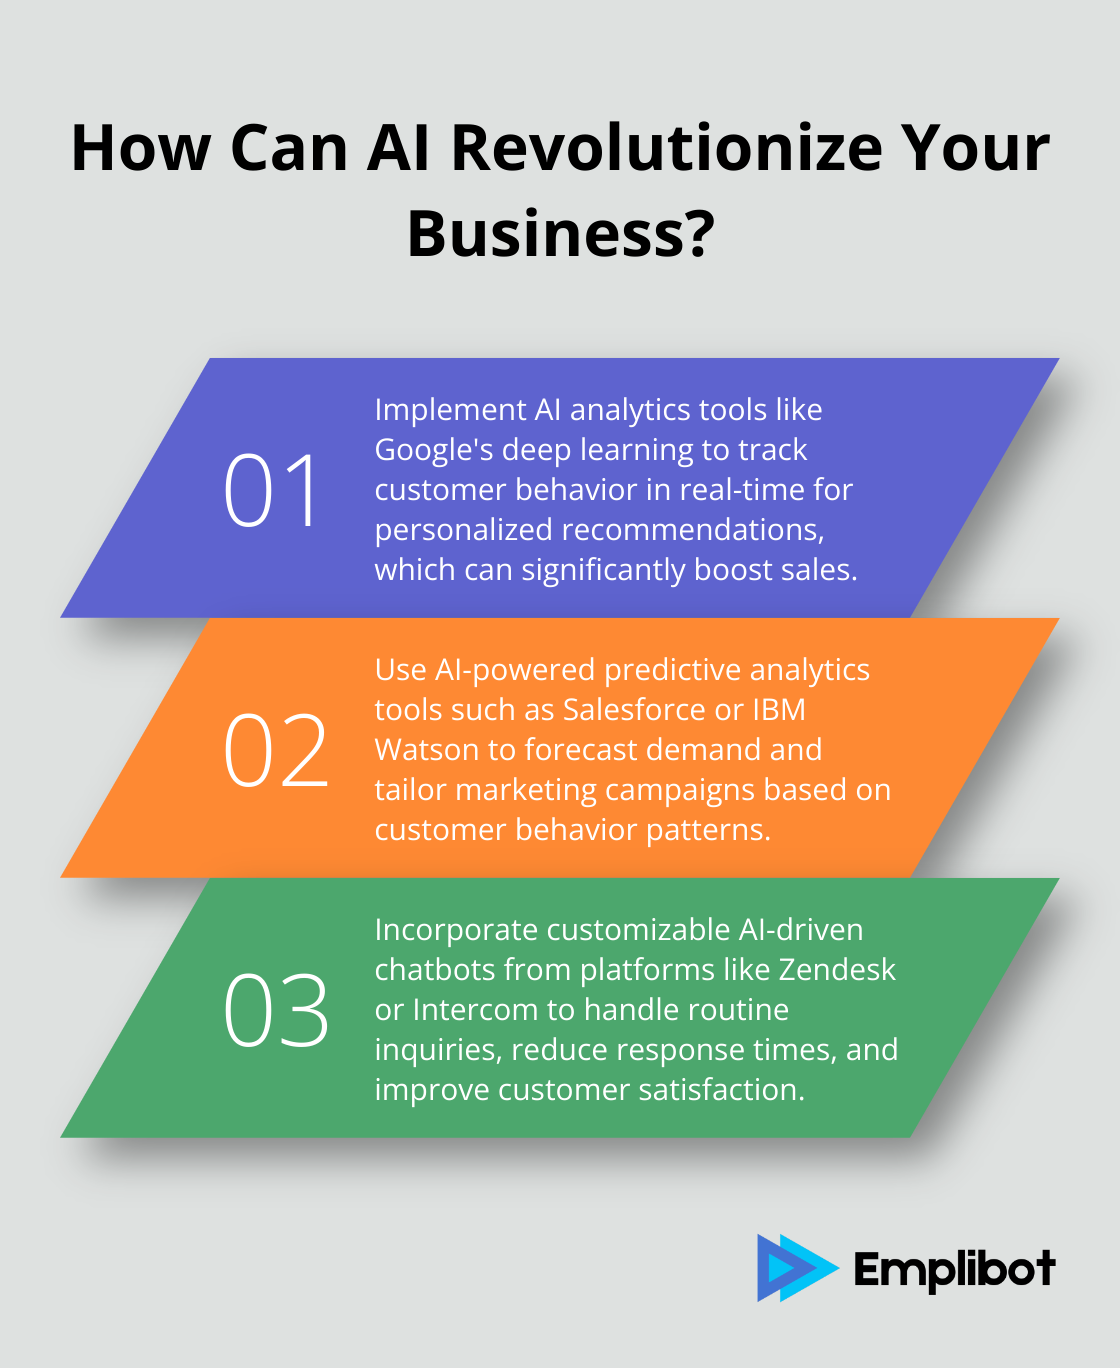 Fact - How Can AI Revolutionize Your Business?